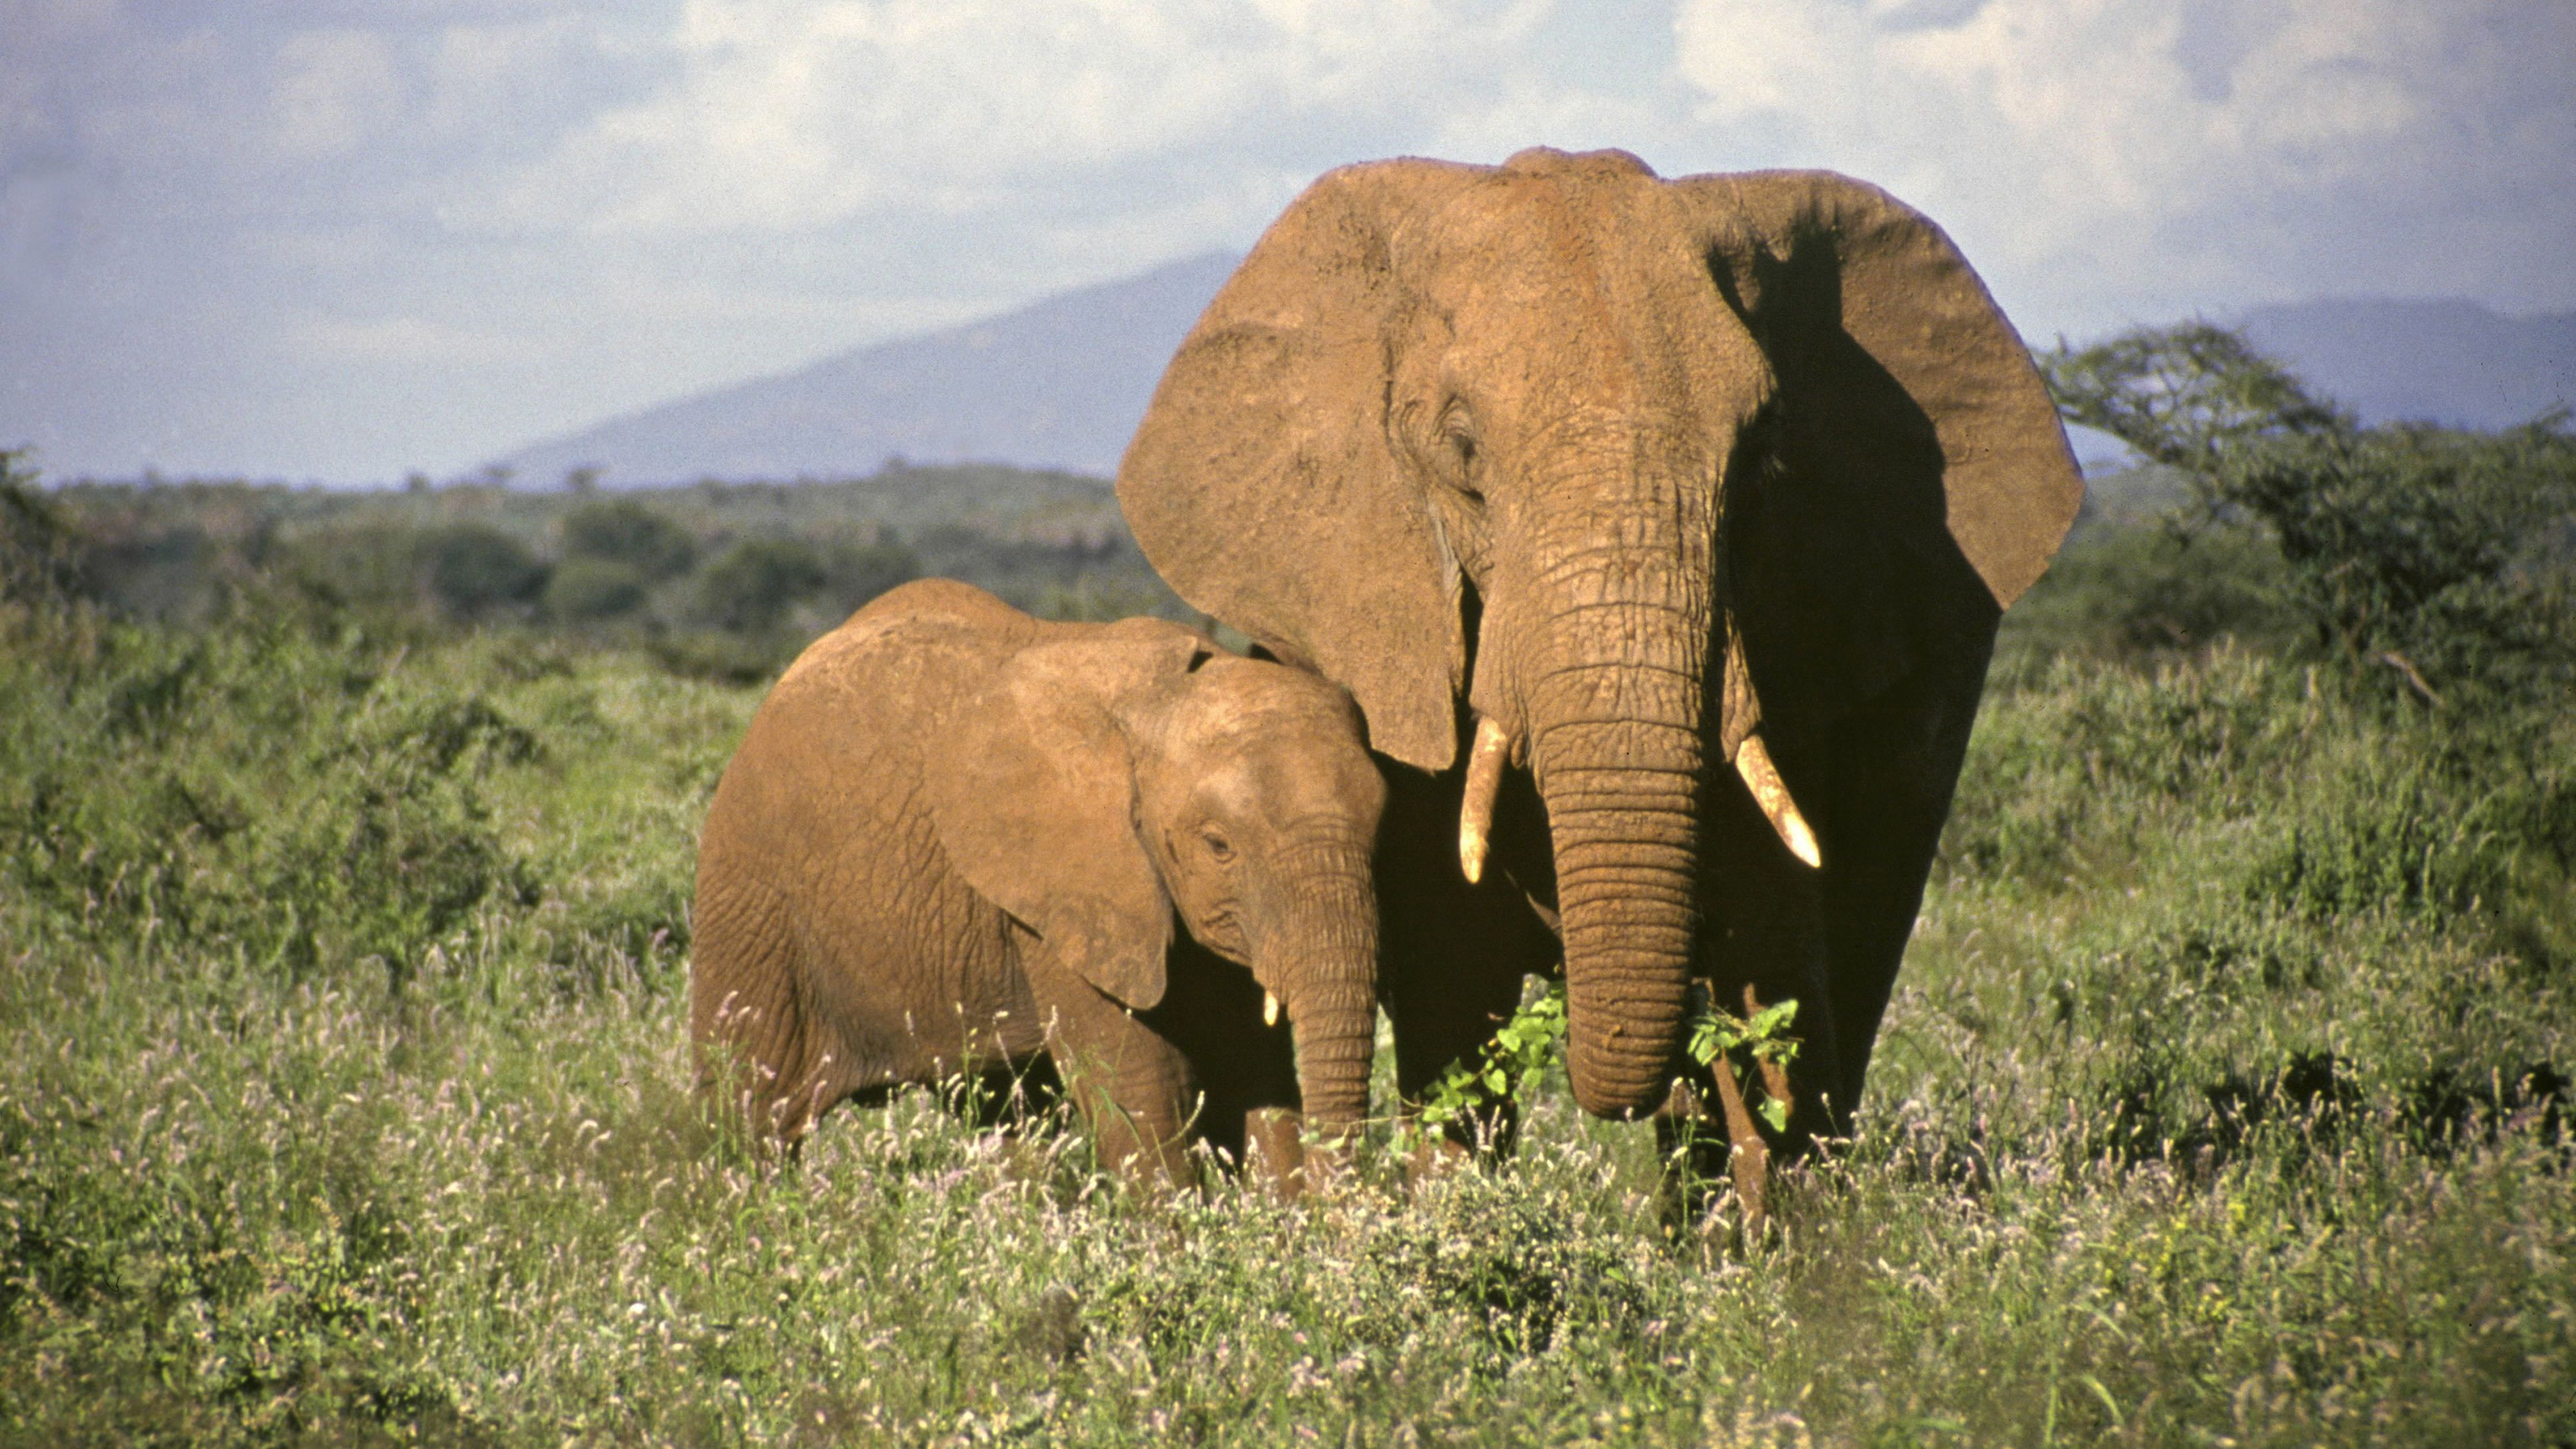 What age do baby elephants leave the herd?